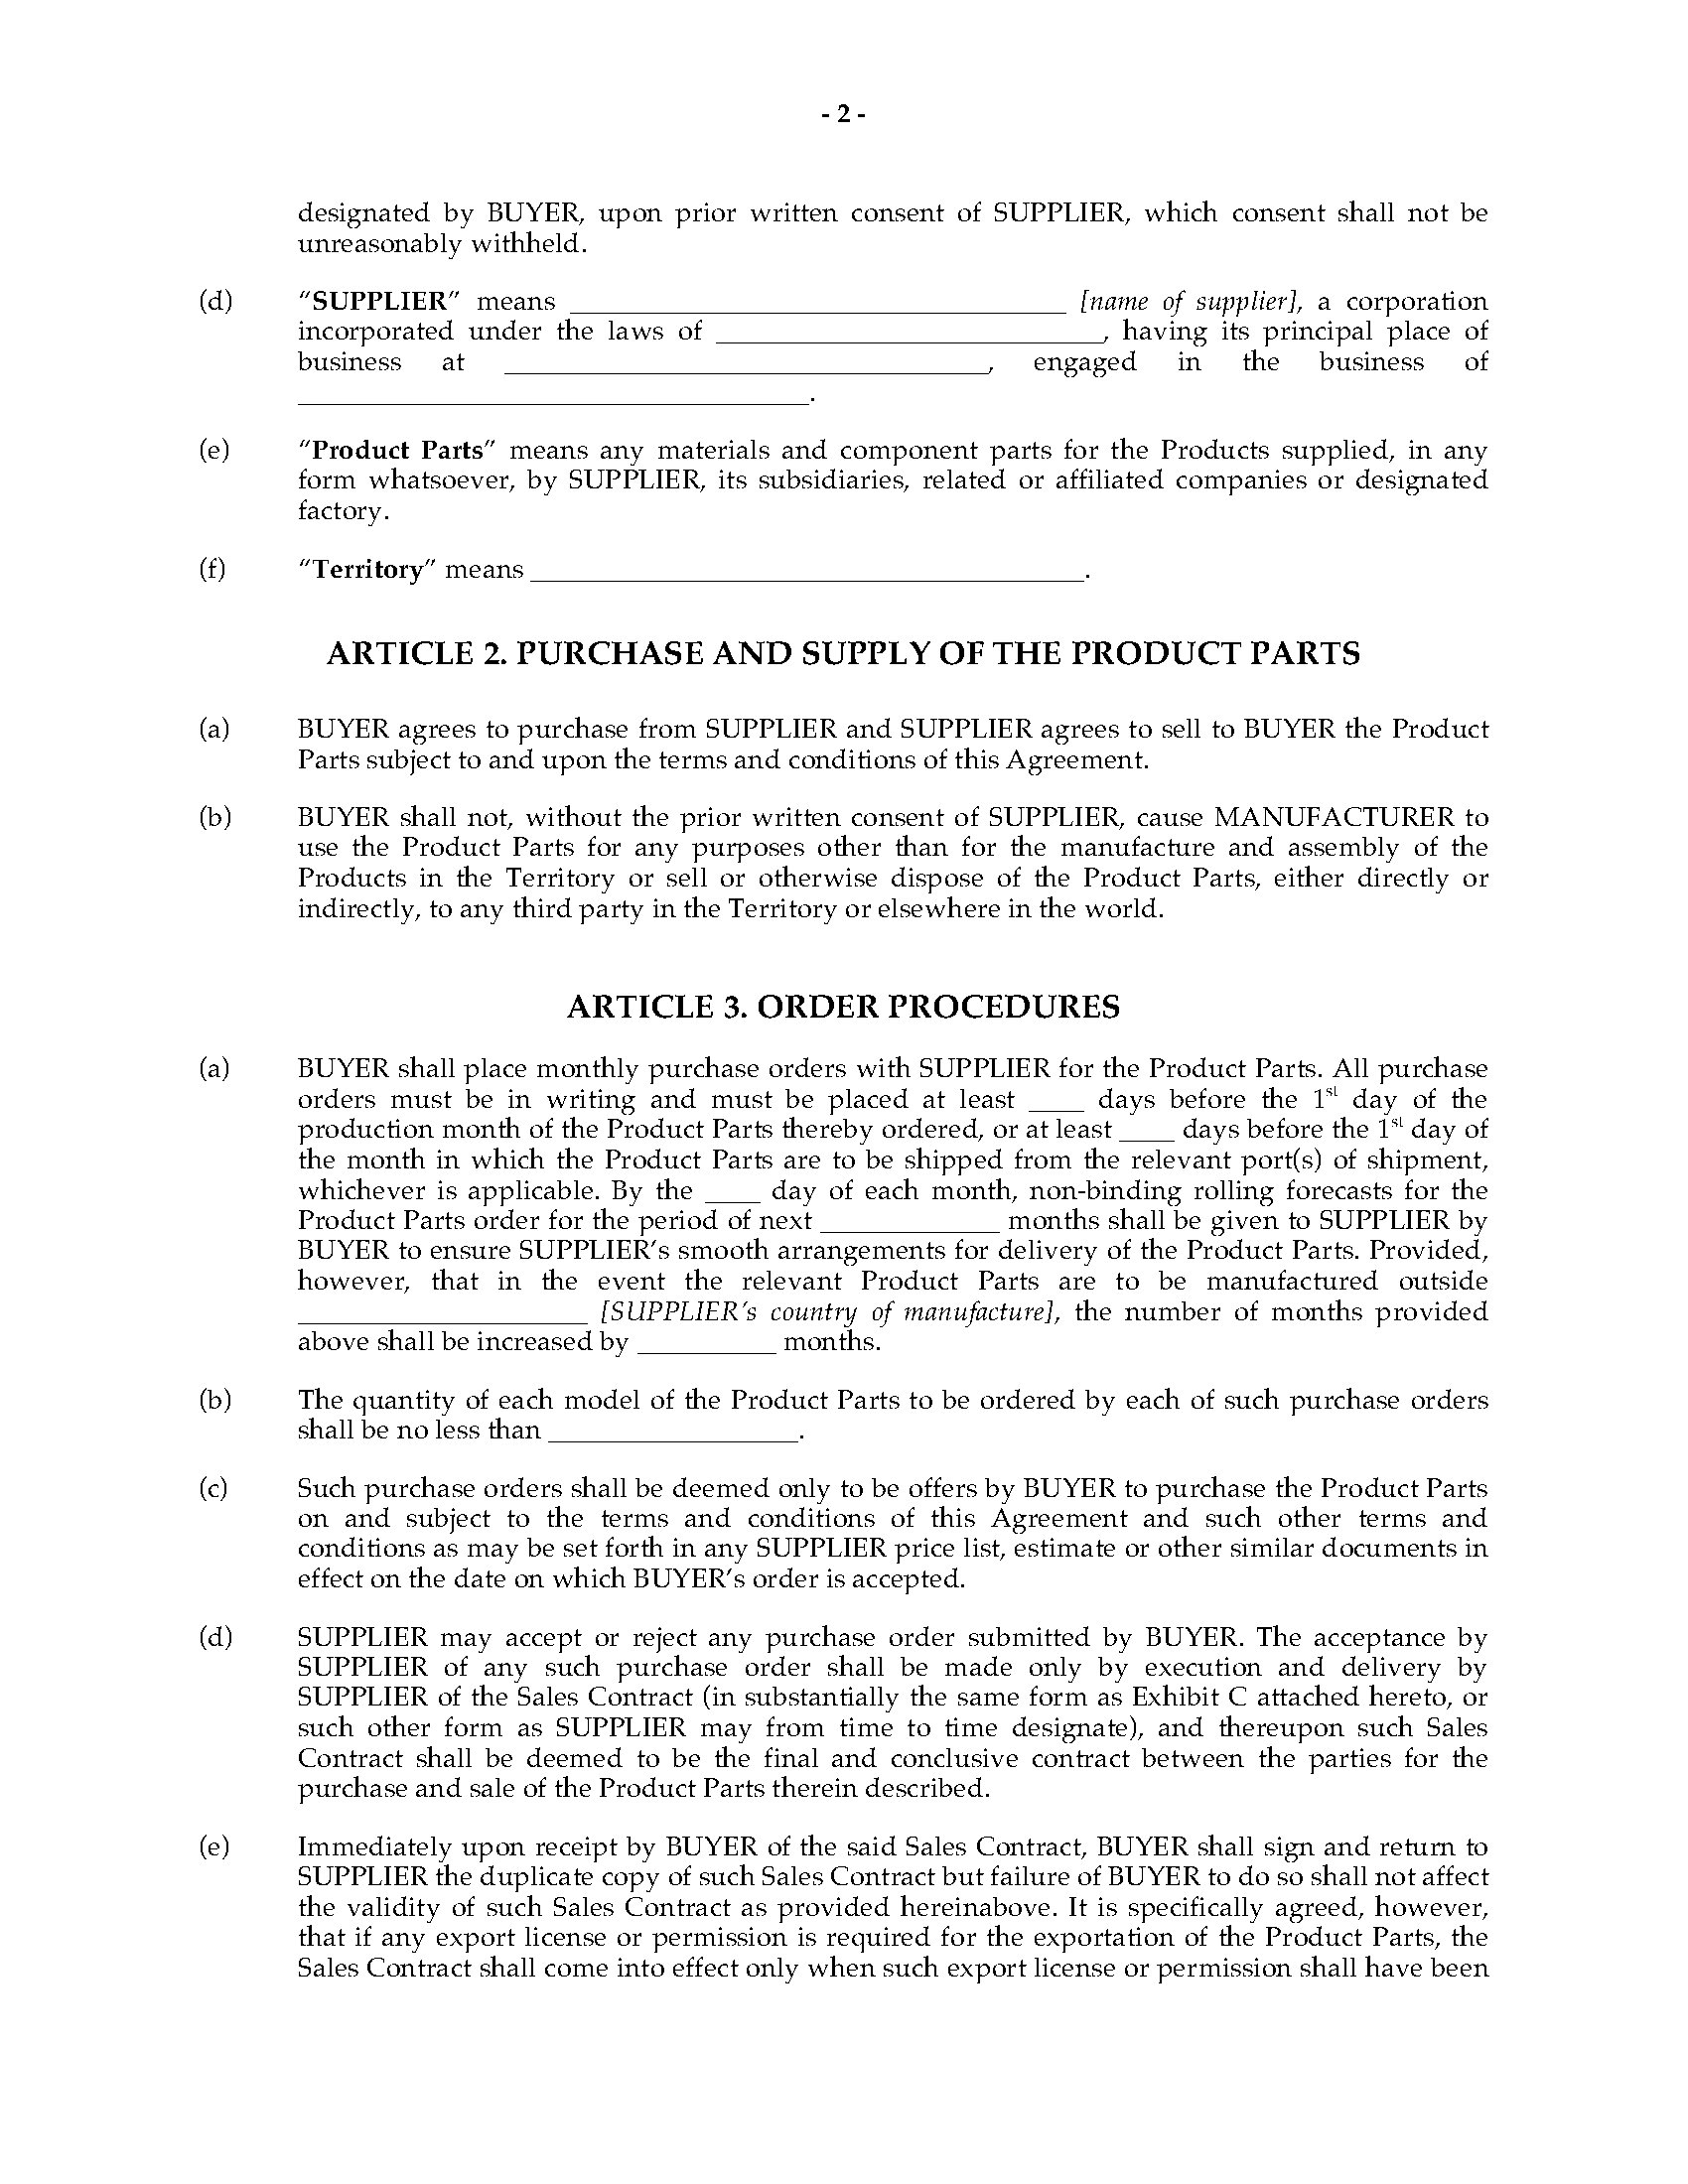 China Product Supply Agreement Legal Forms and Business Templates